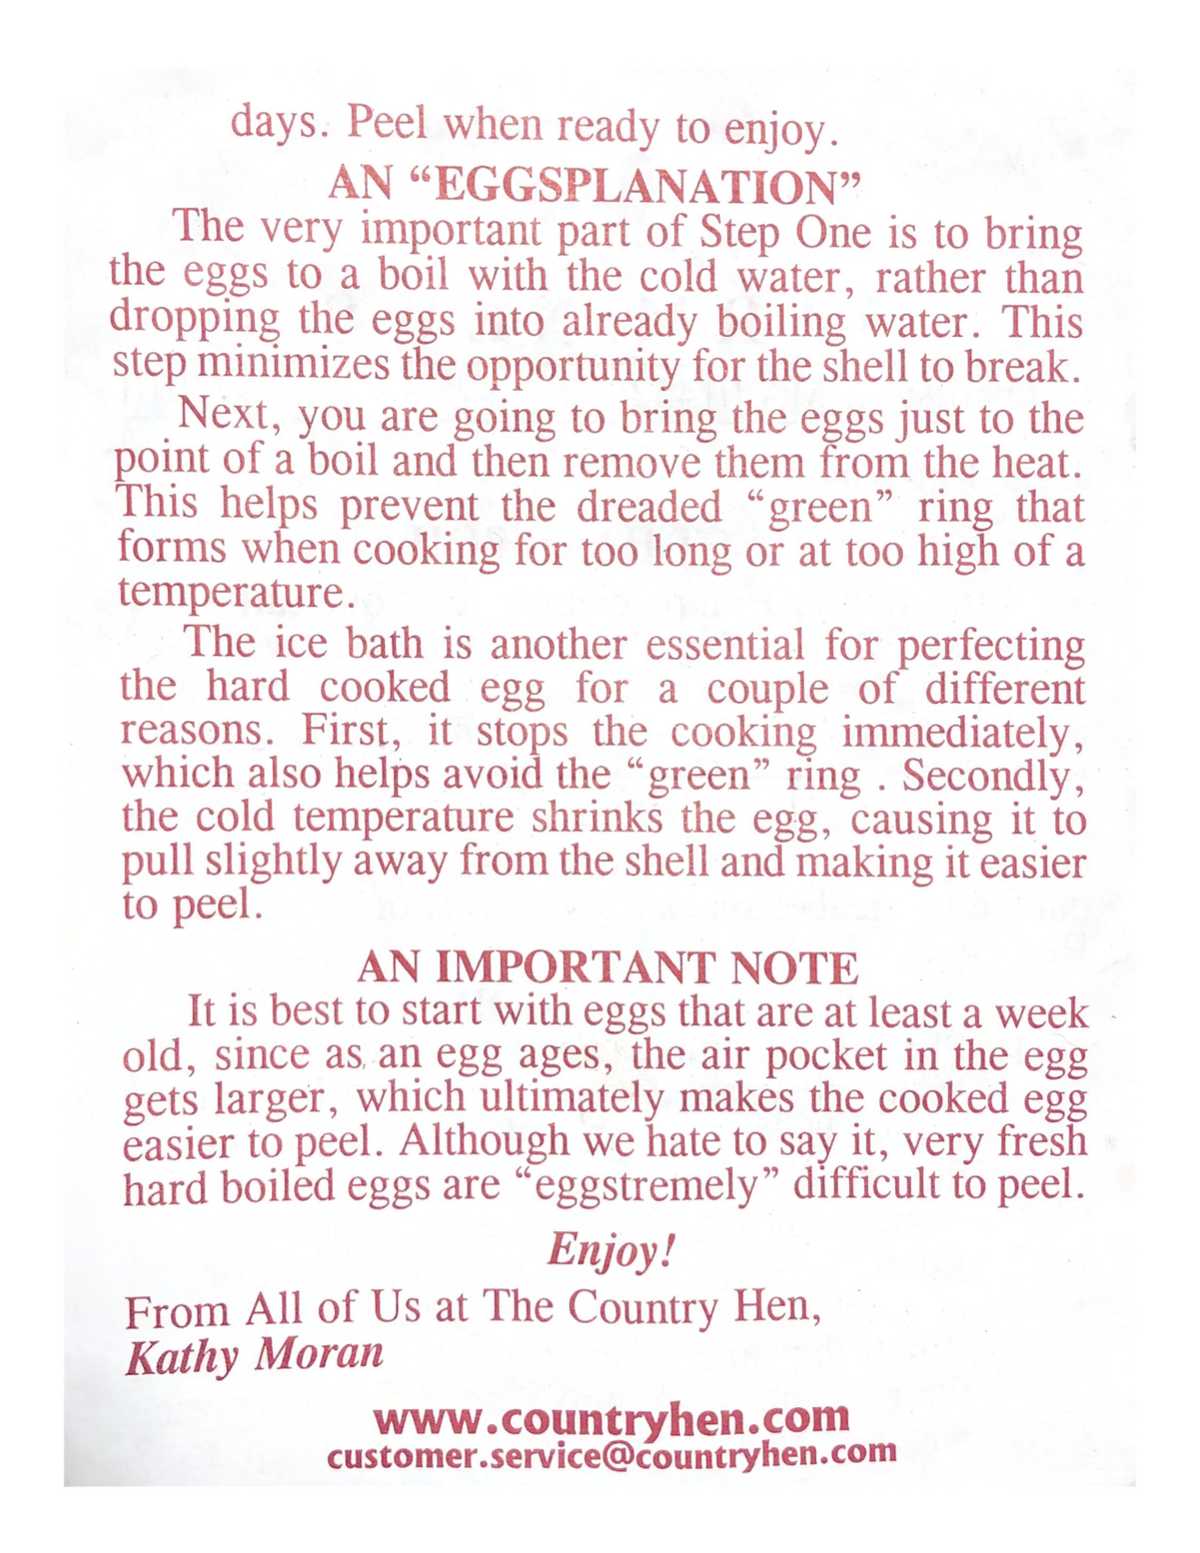 The Country Hen’s hard-boiled egg instructions, back